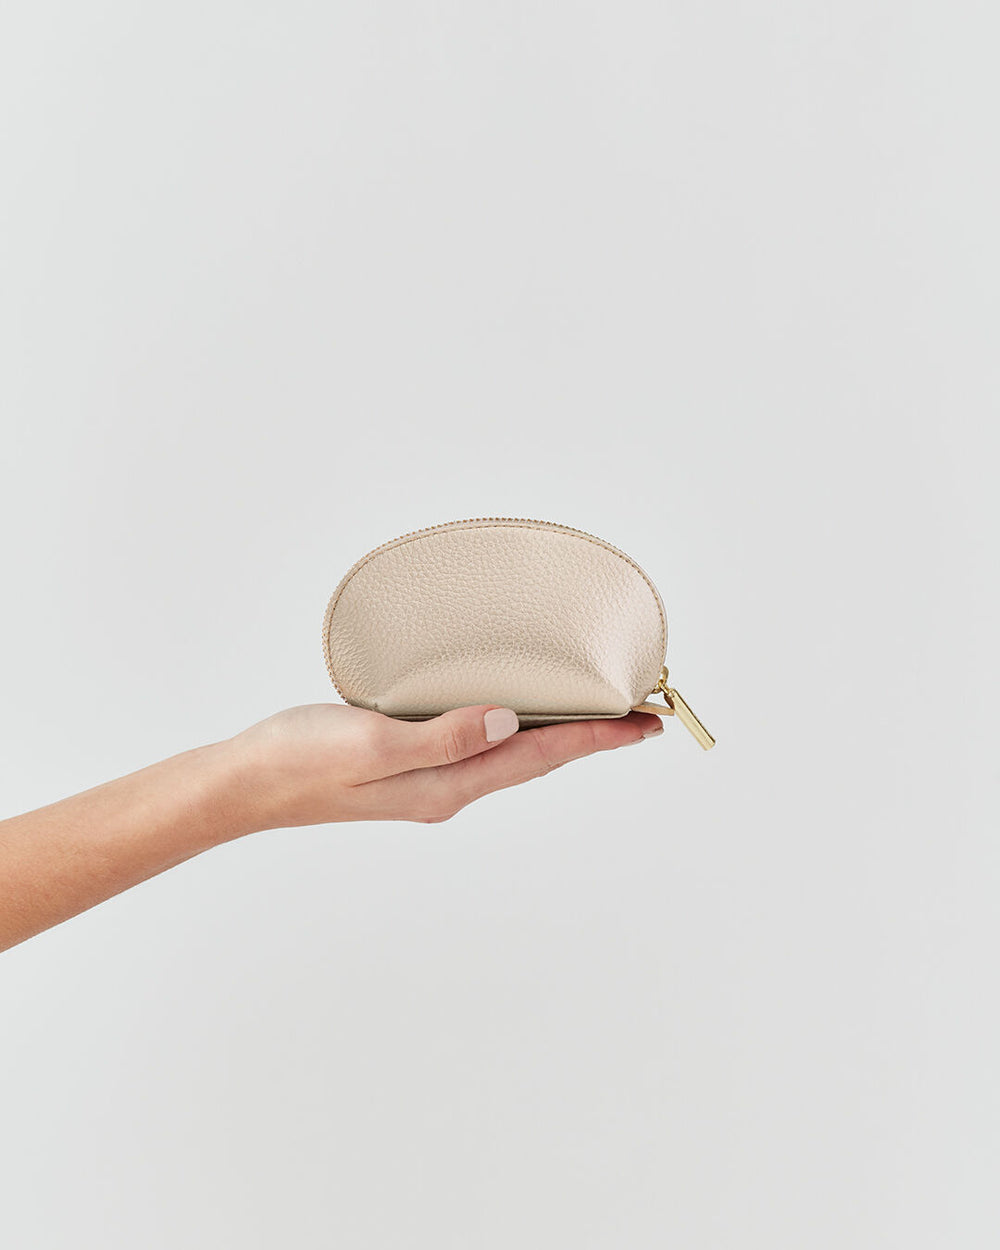 Hand holding a small zippered pouch against a plain background.